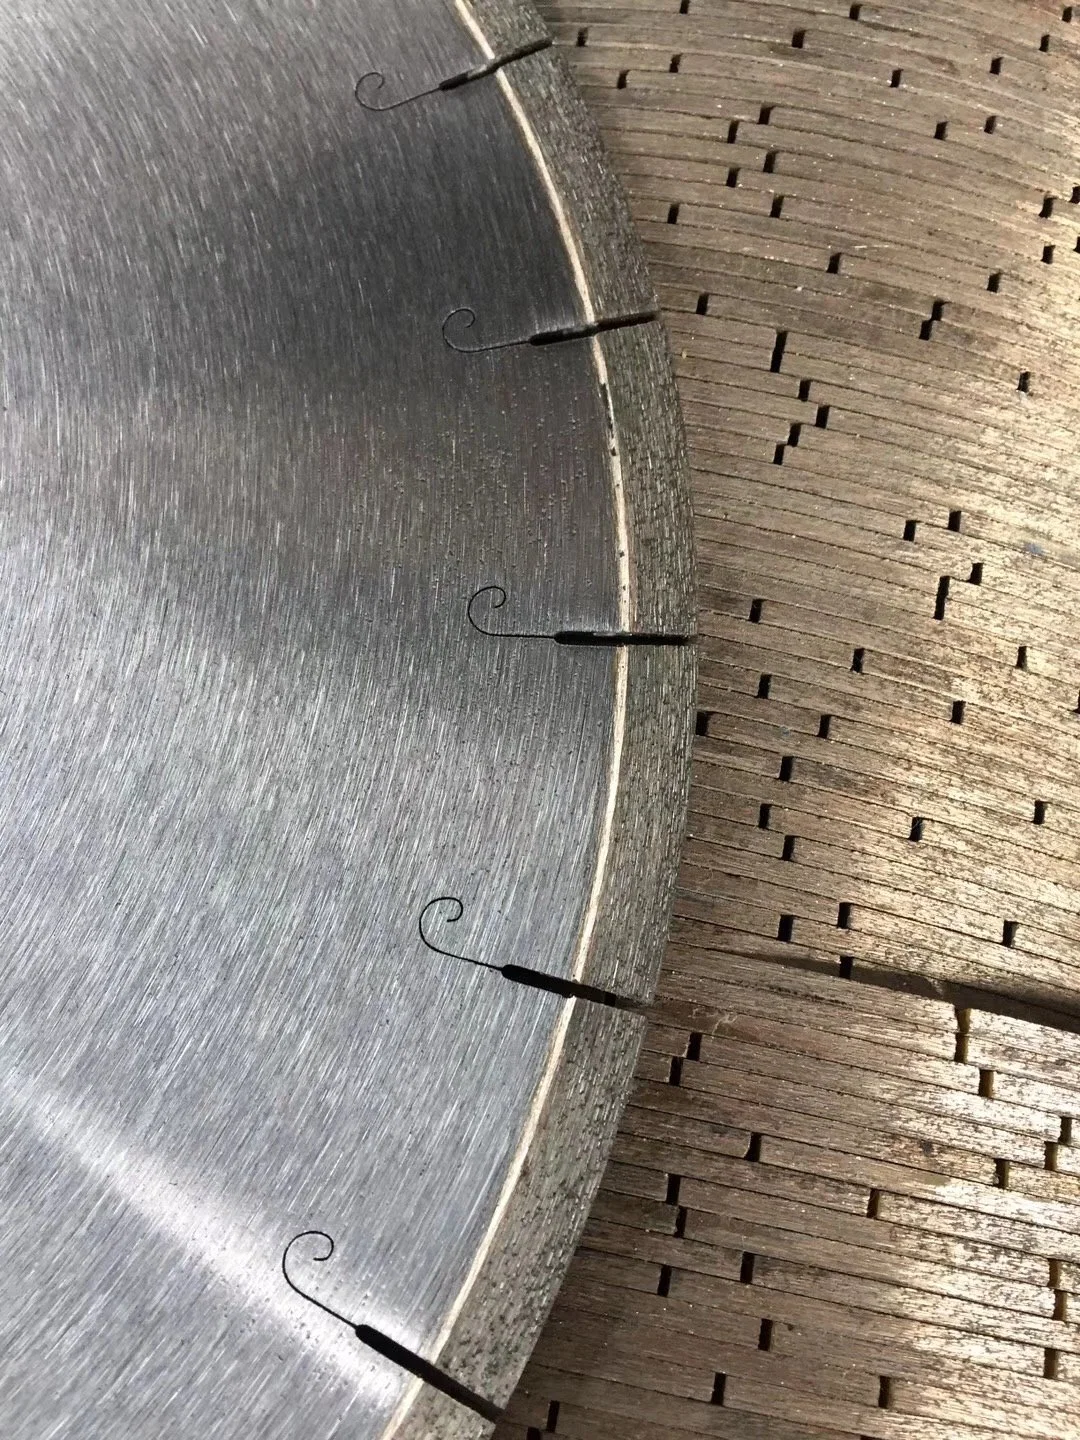 400 Diamond Saw blade for Marble Cutting